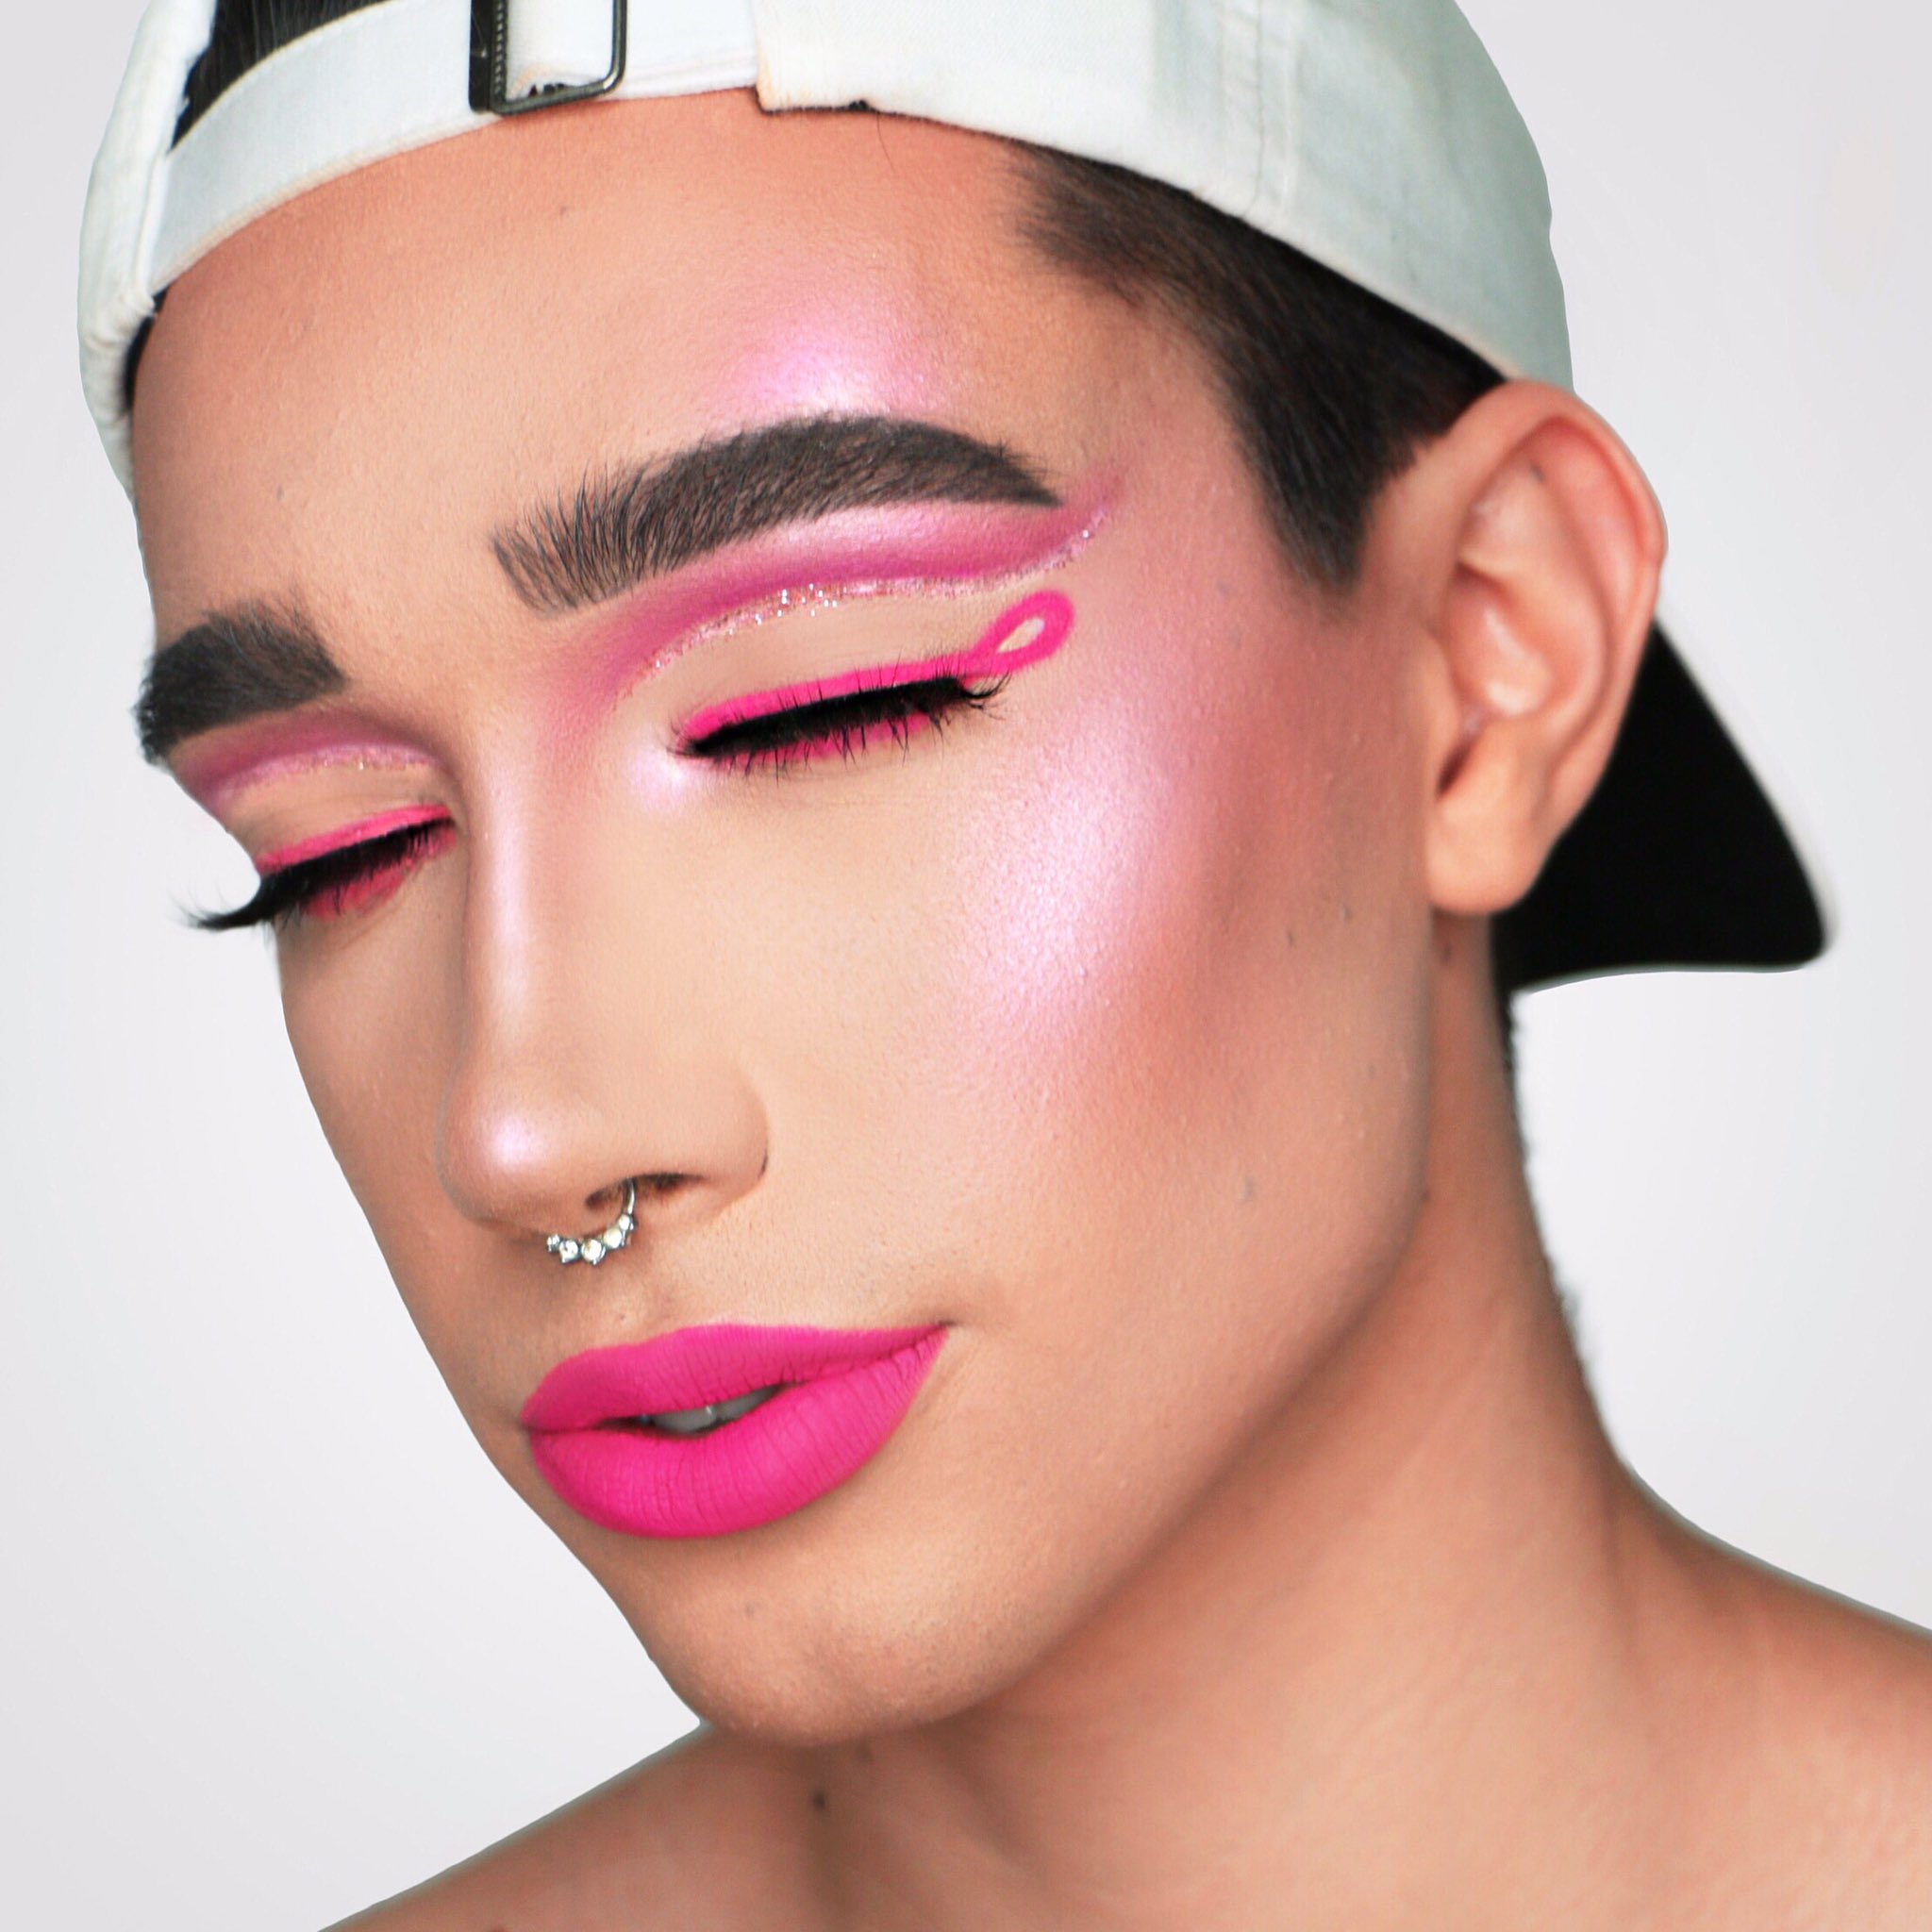 James Charles. in honor of my mama. 